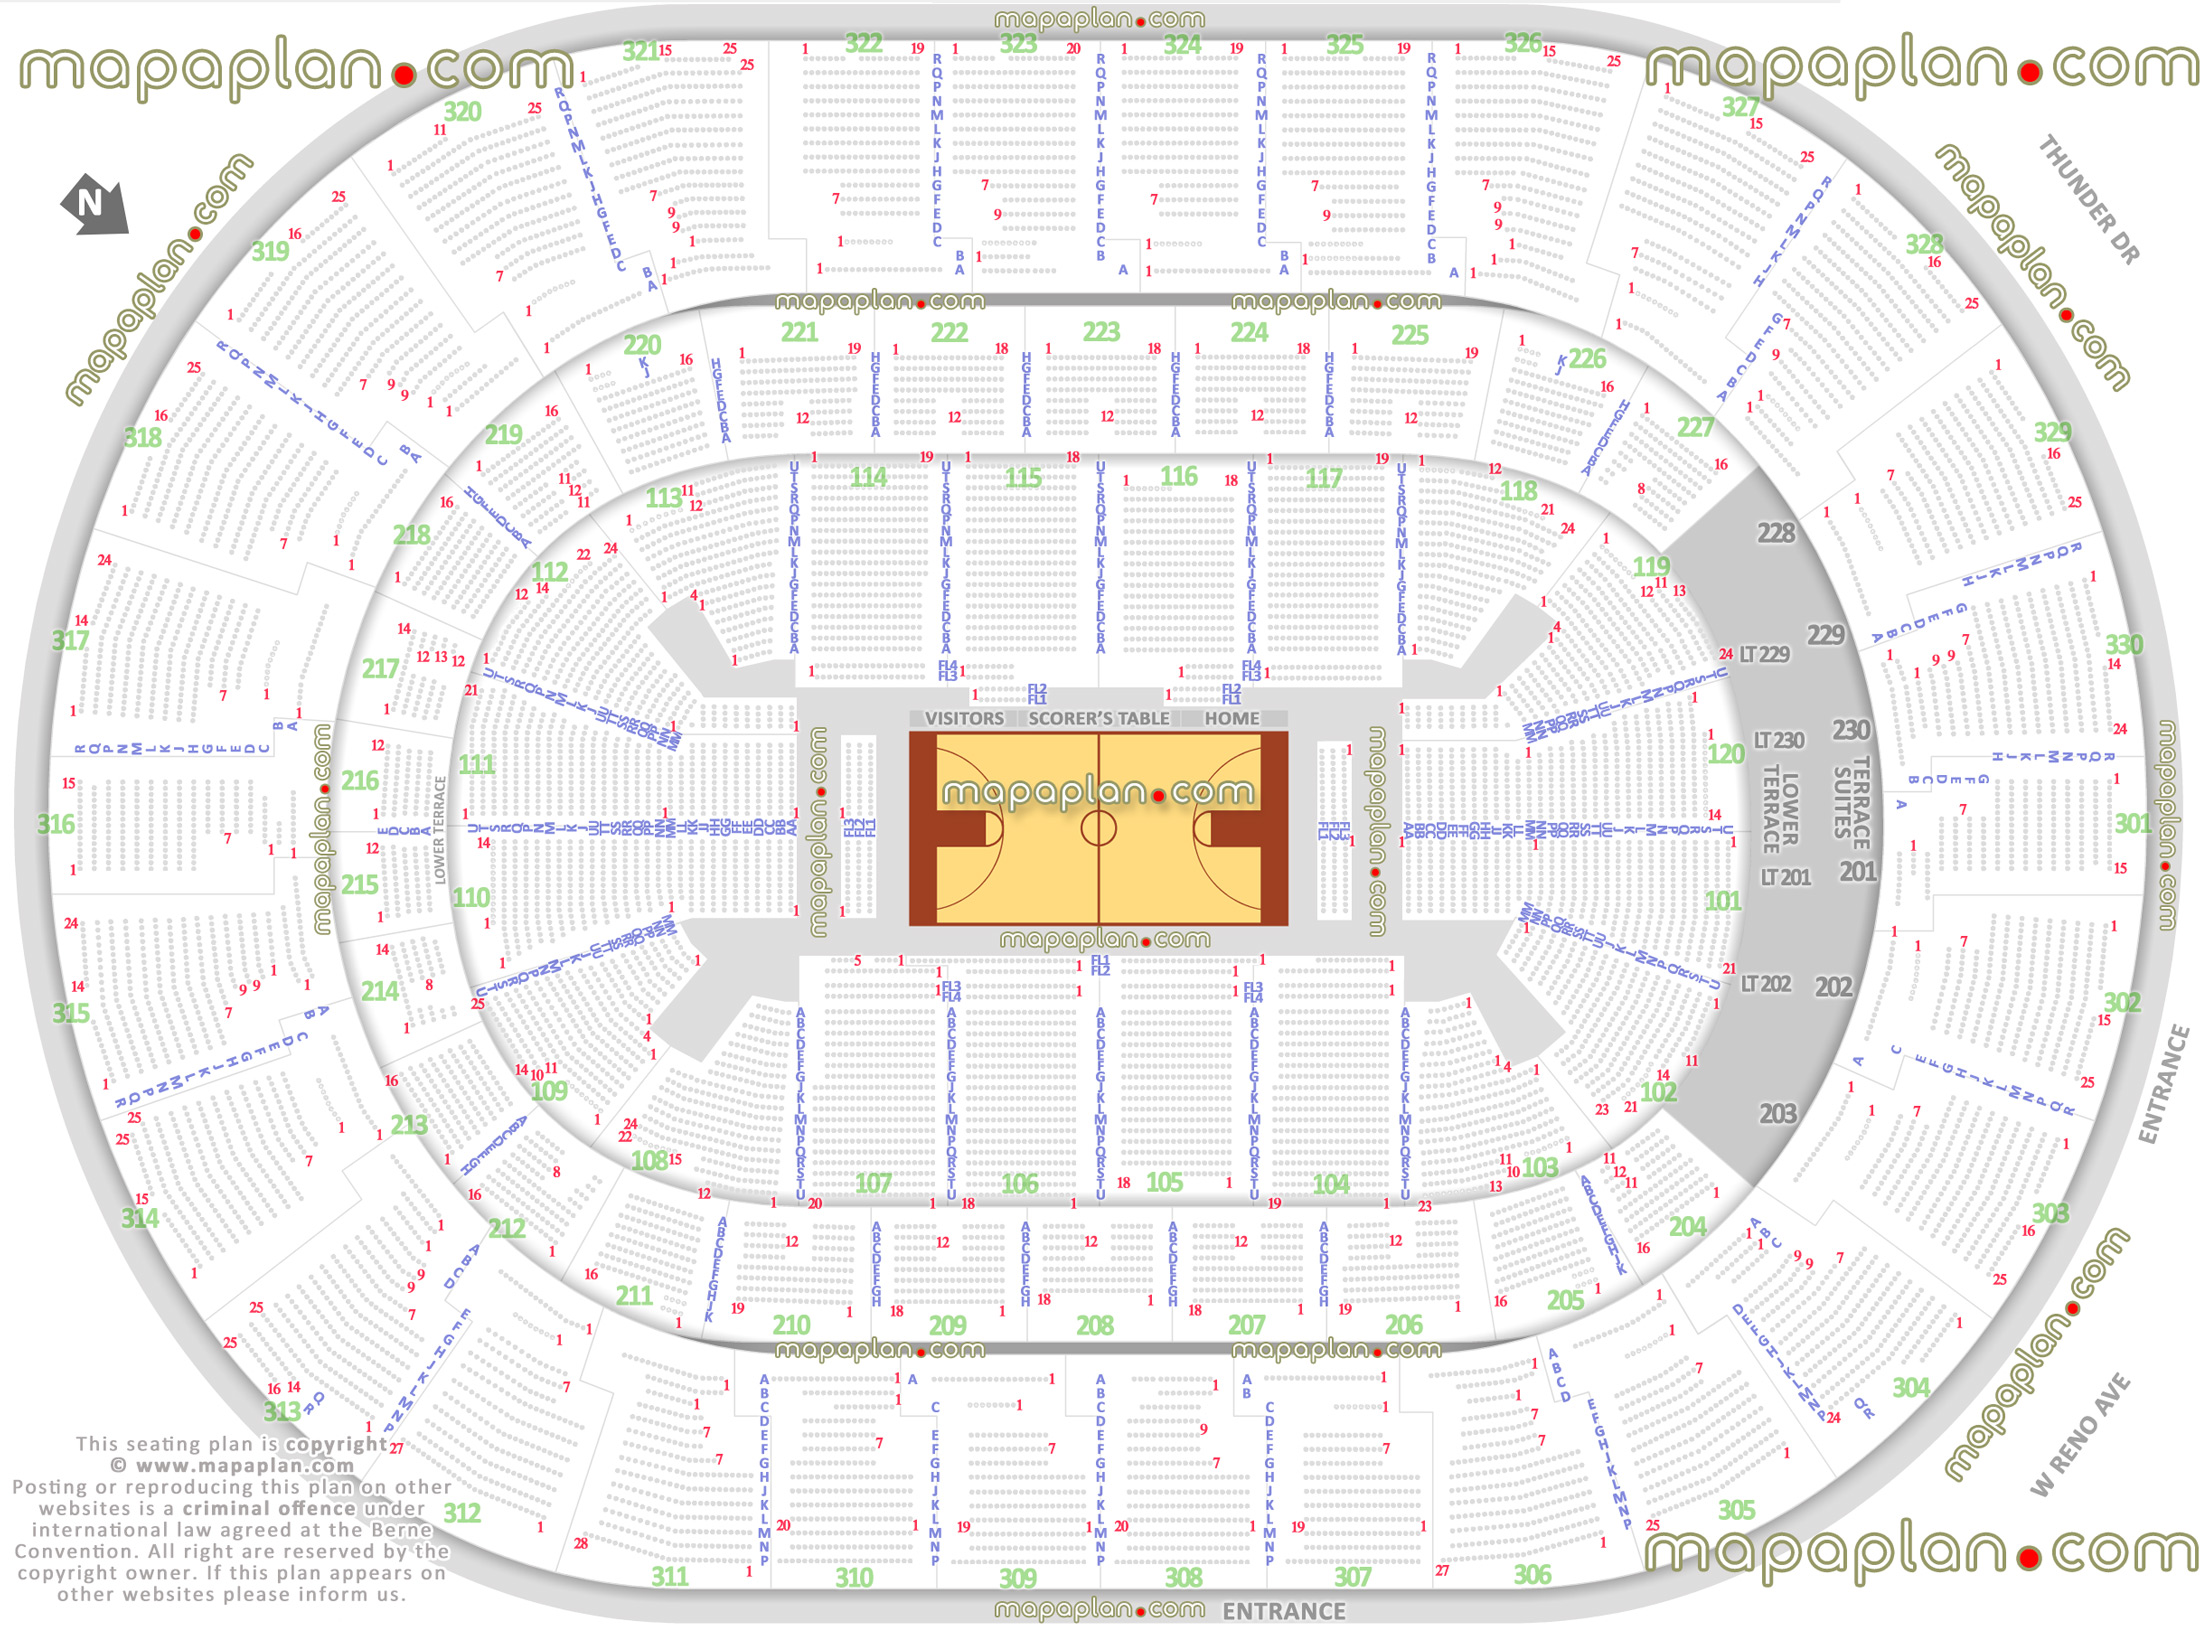 basketball plan oklahoma city thunder nba ncaa tournament games arena stadium diagram individual find seat locator row best numbered lower club upper level sections 101 102 103 104 105 106 107 108 109 110 111 112 113 114 115 116 117 118 119 120 Oklahoma City Chesapeake Energy Arena seating chart